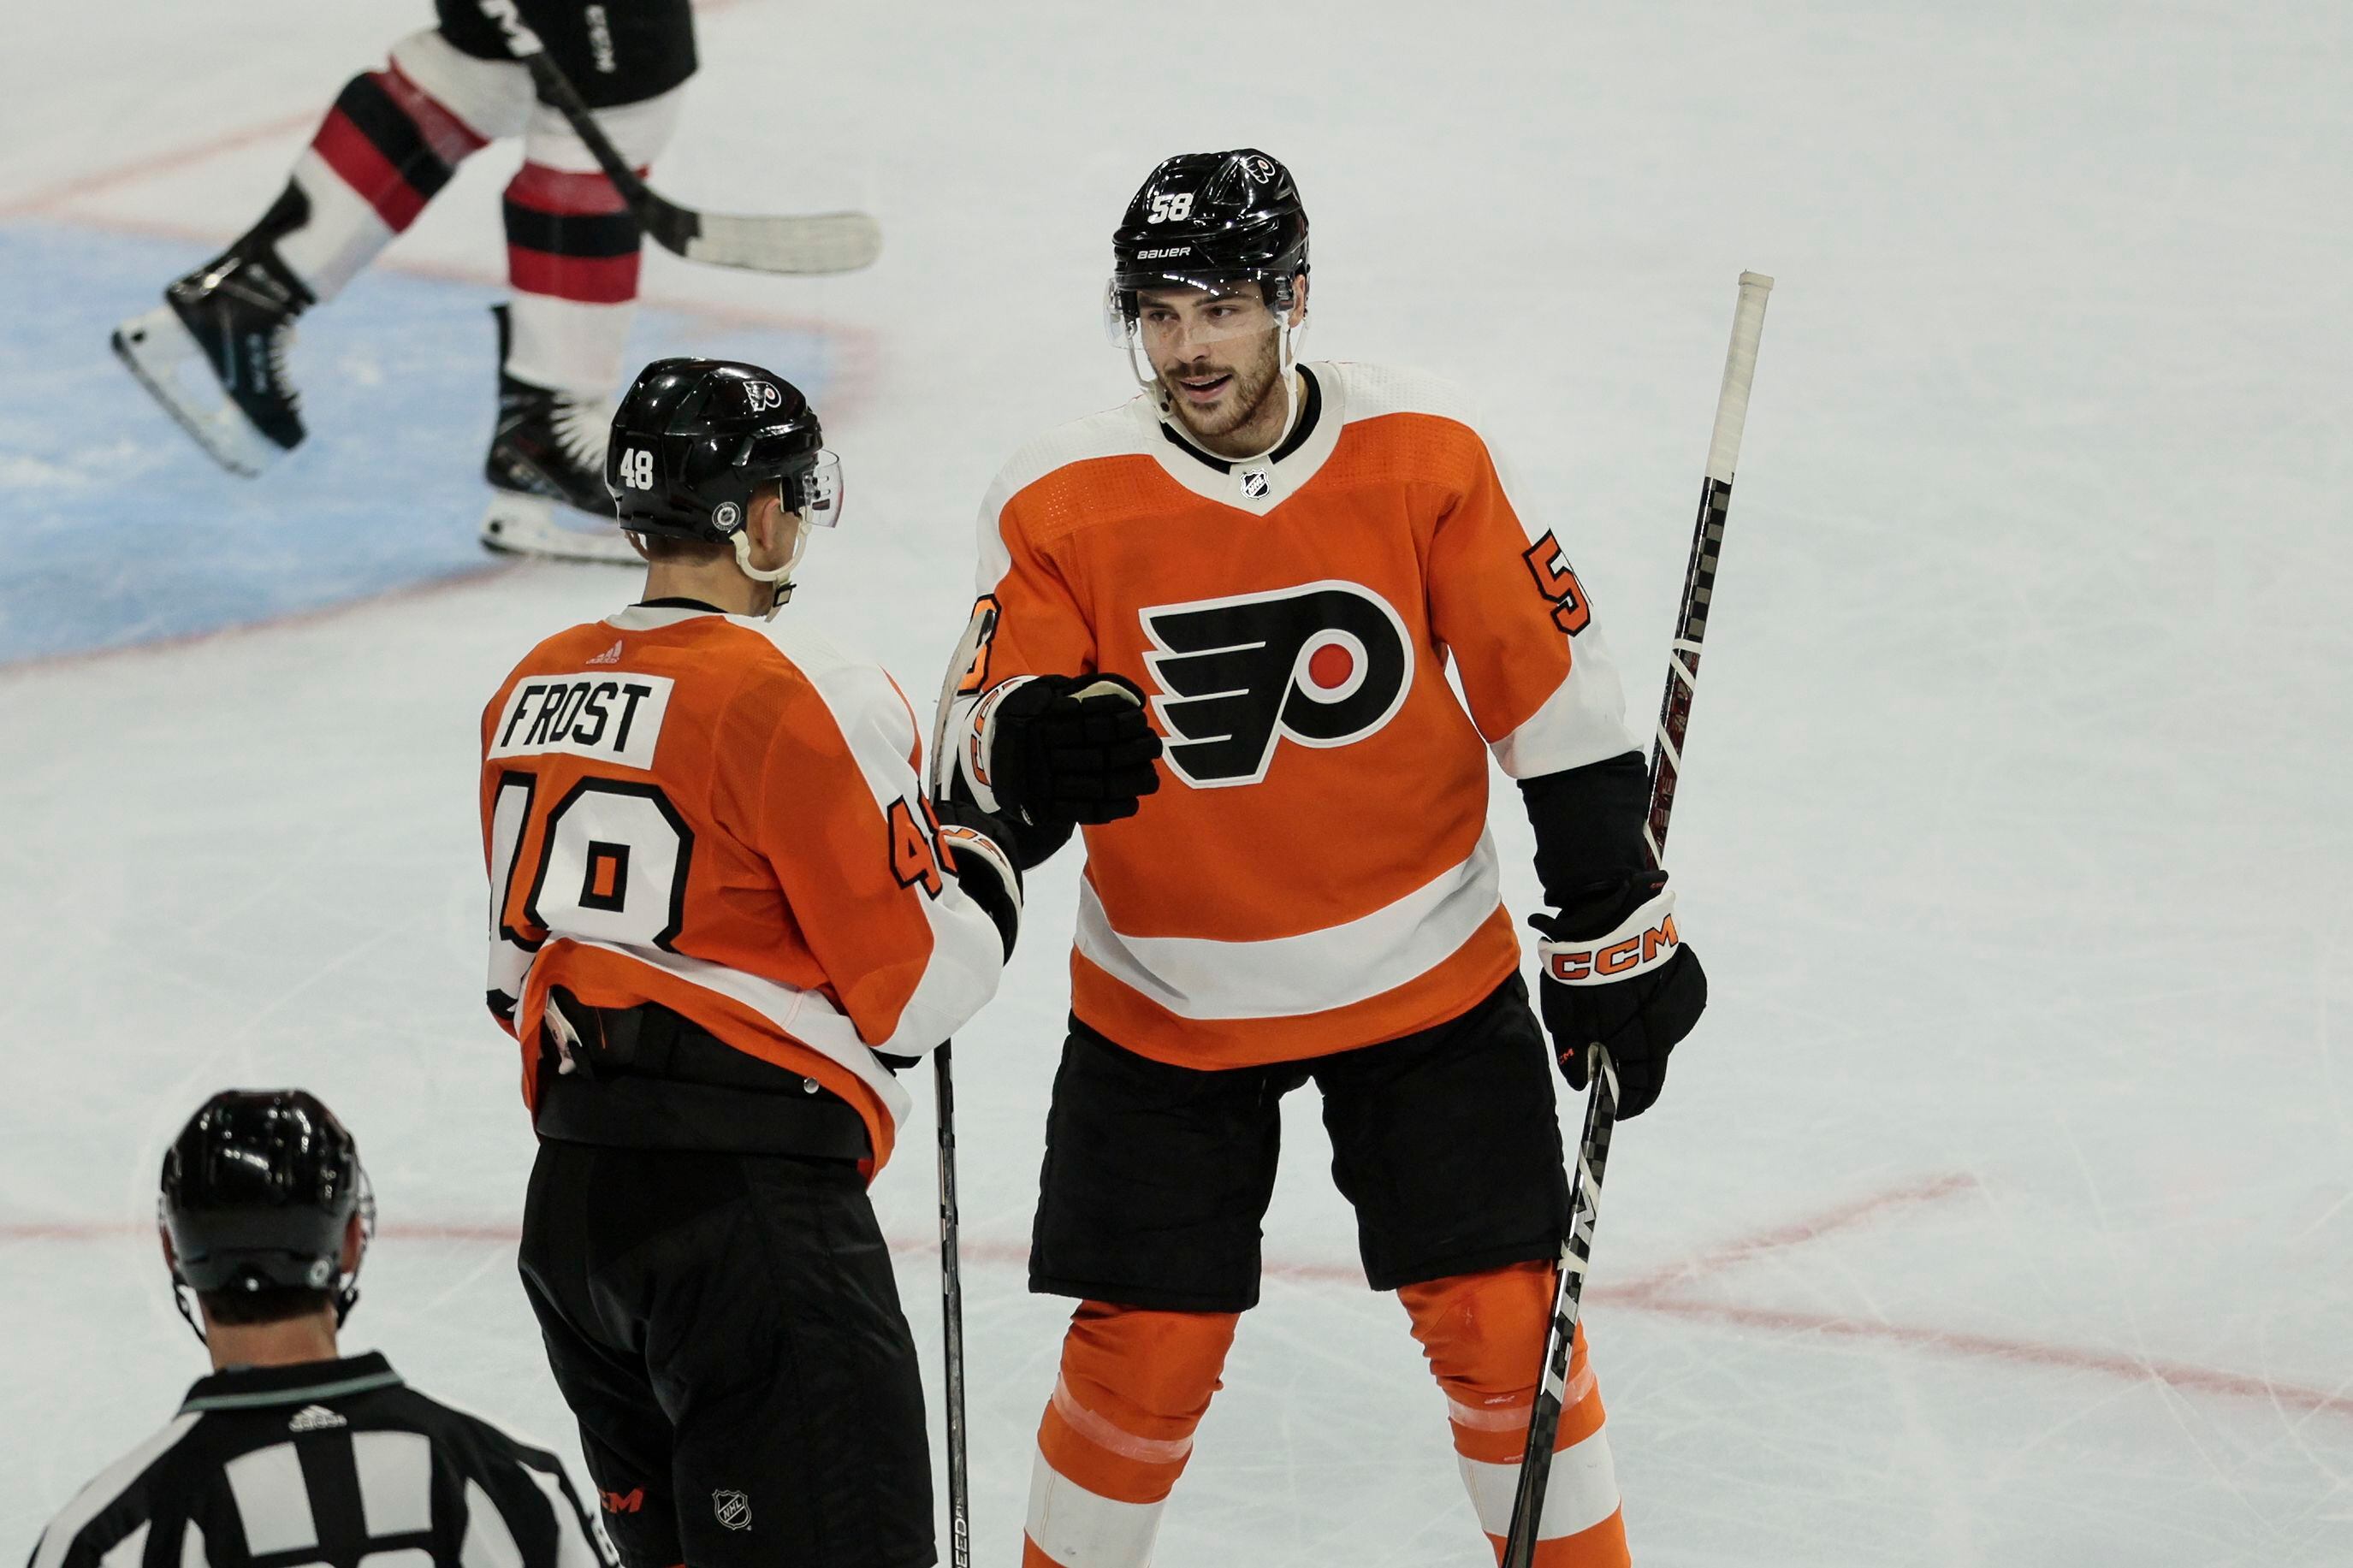 Flyers' season ends with Game 5 loss to Devils – thereporteronline